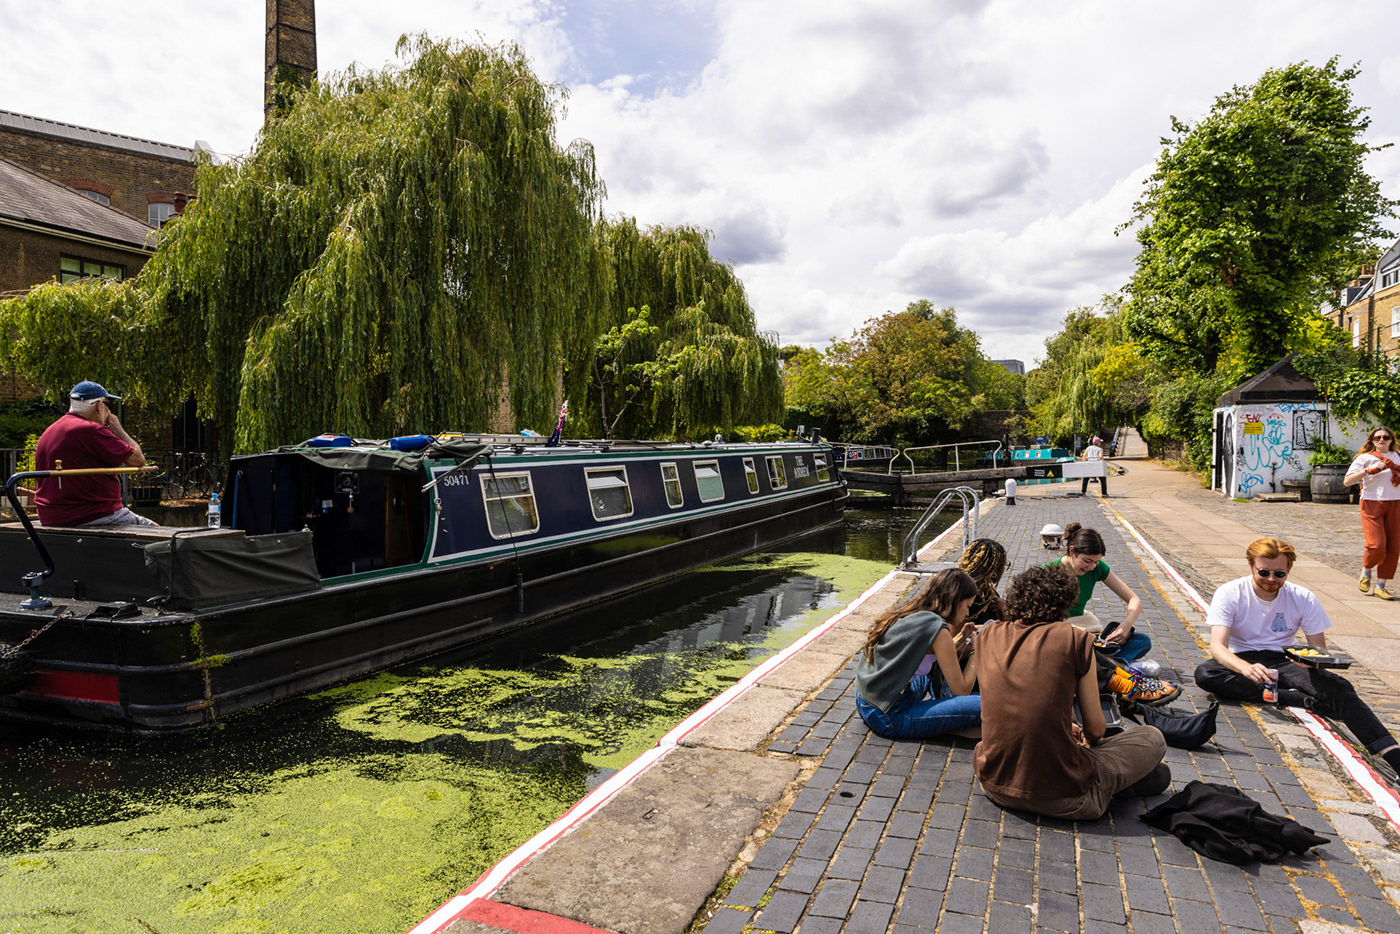 London Shane Aurousseau photographer Canalside travel photography lifestyle photography cityscapes Waterways & Canals waterways of Britain cityscape photography